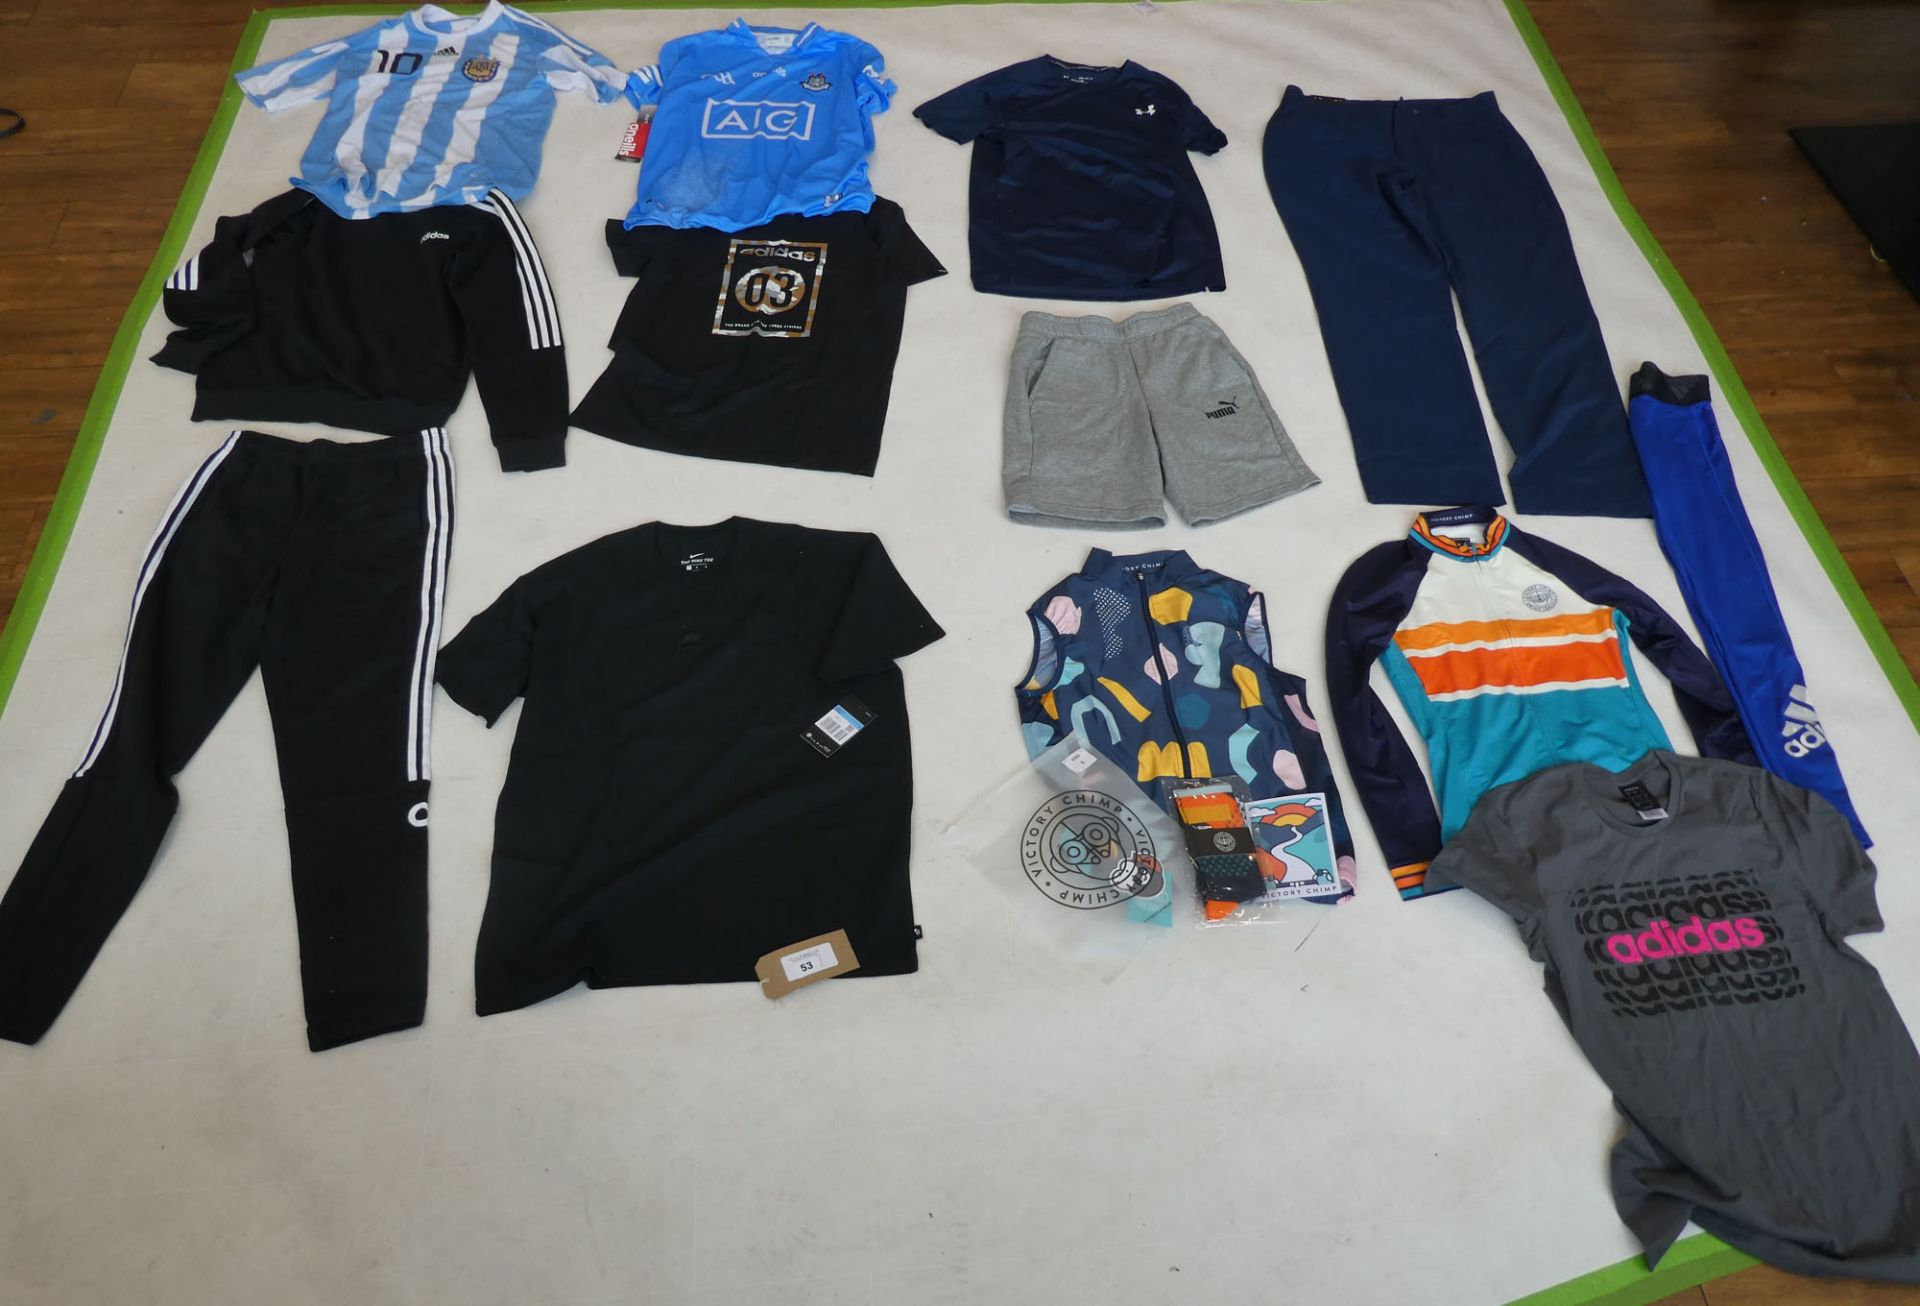 Selection of sportswear to include Nike, Adidas, Victory Chimp, etc (sizes on 2nd photo)